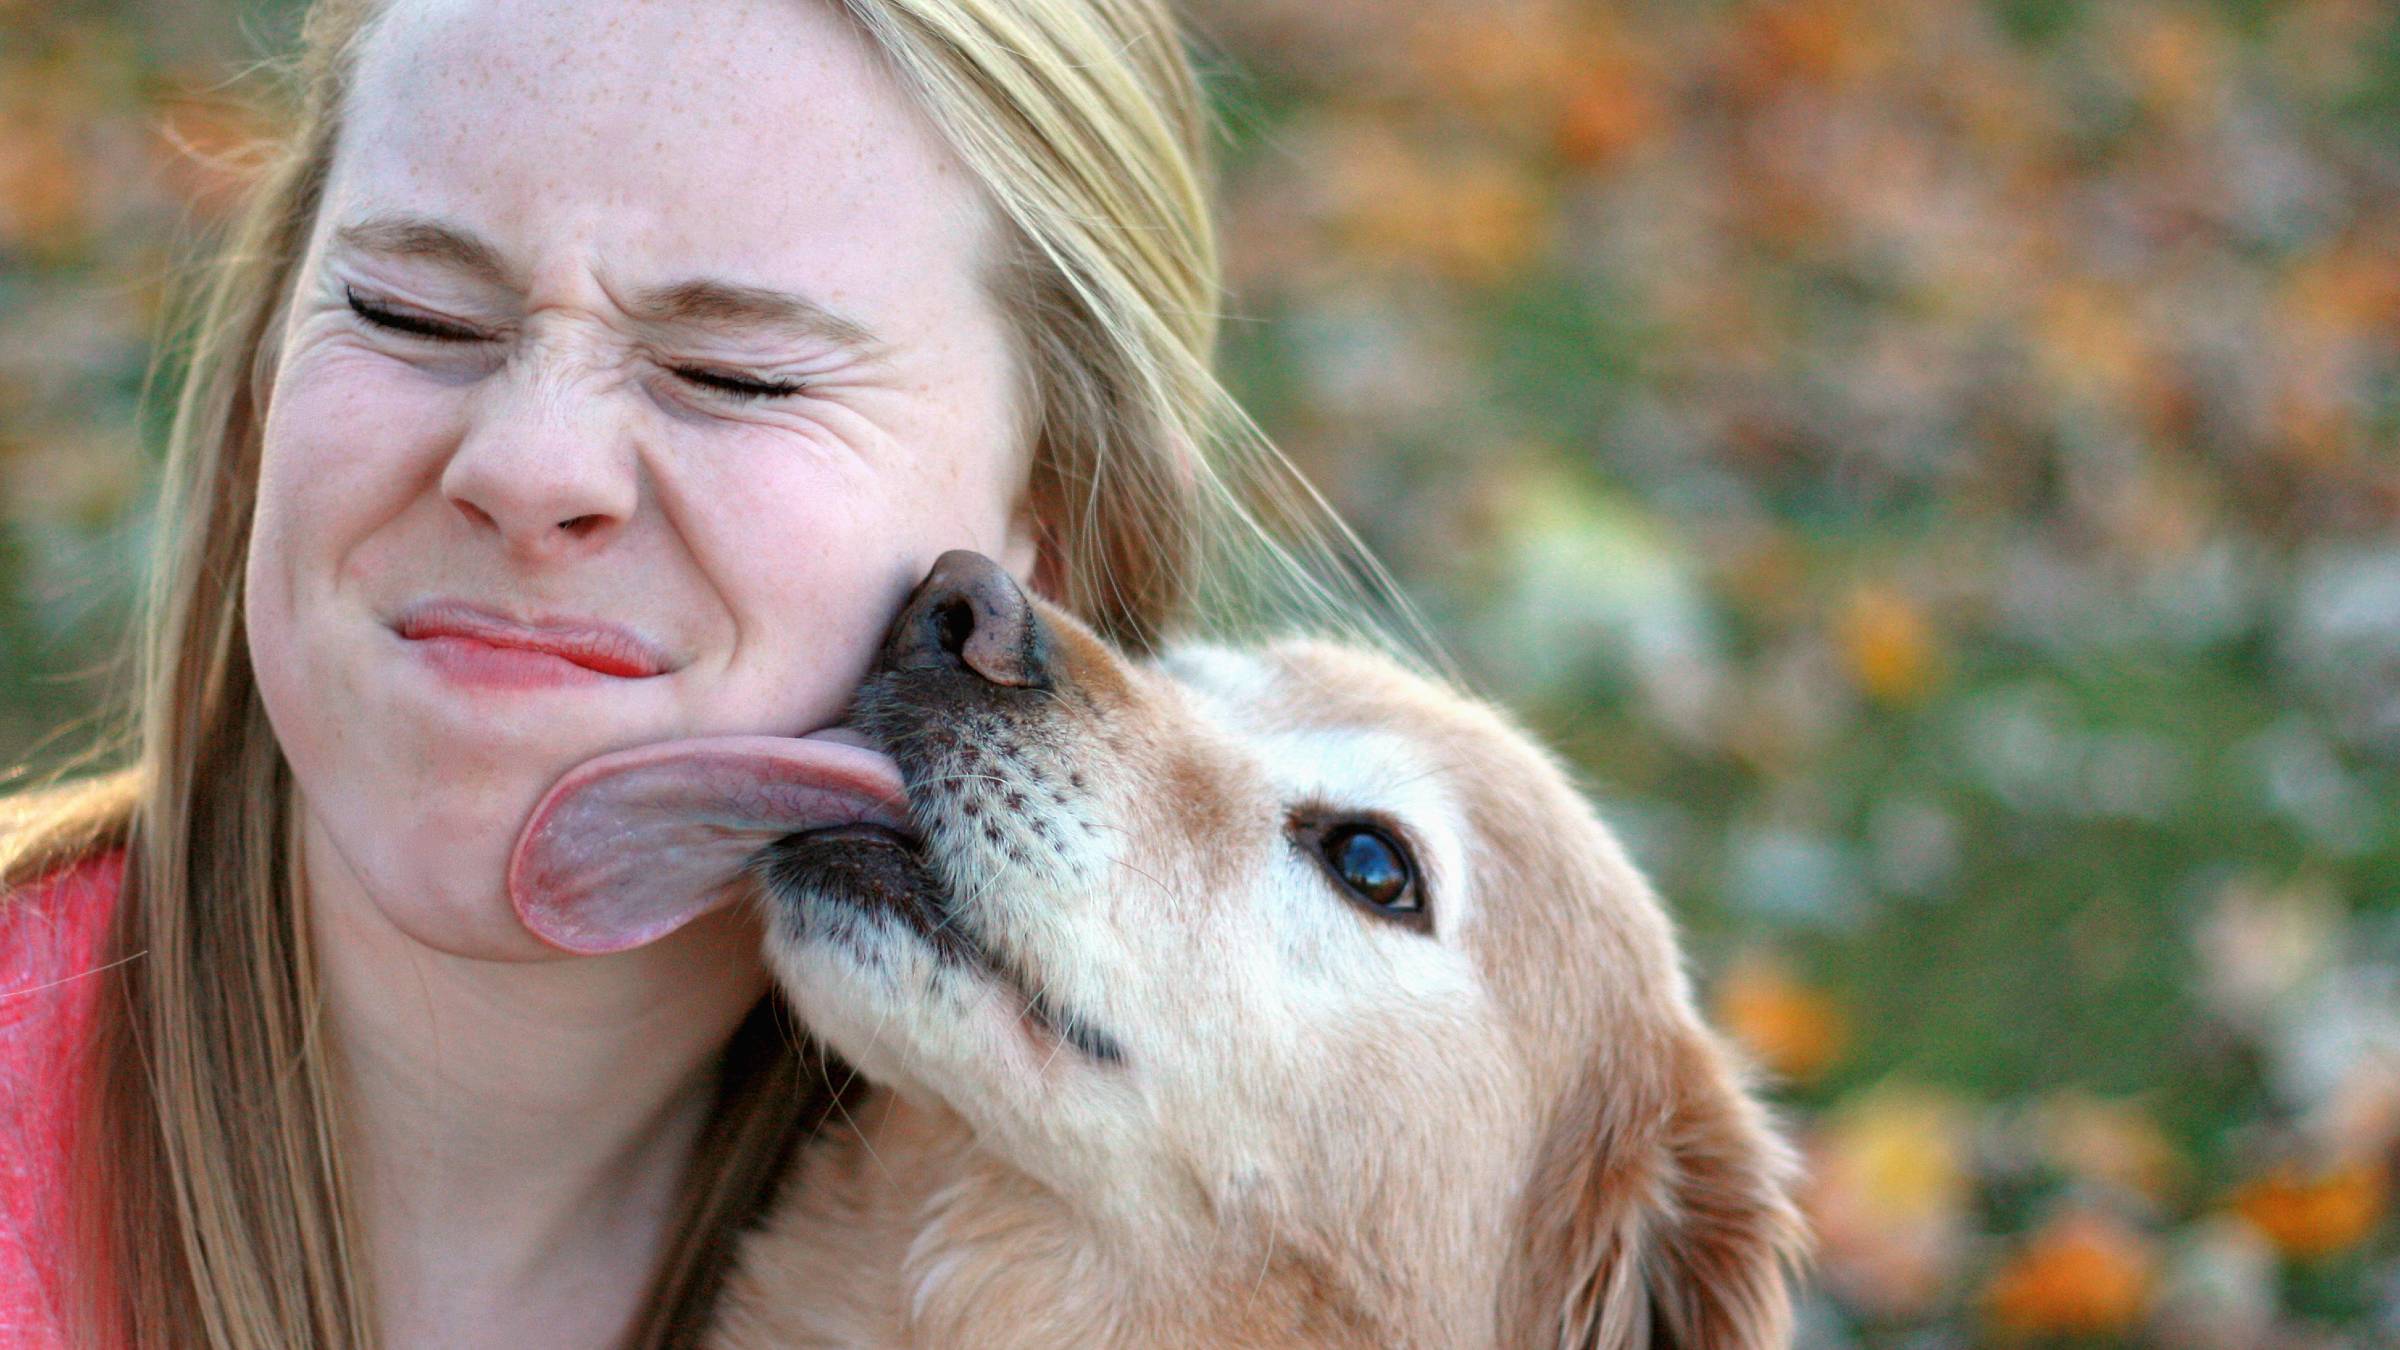 Dog licking a woman's face